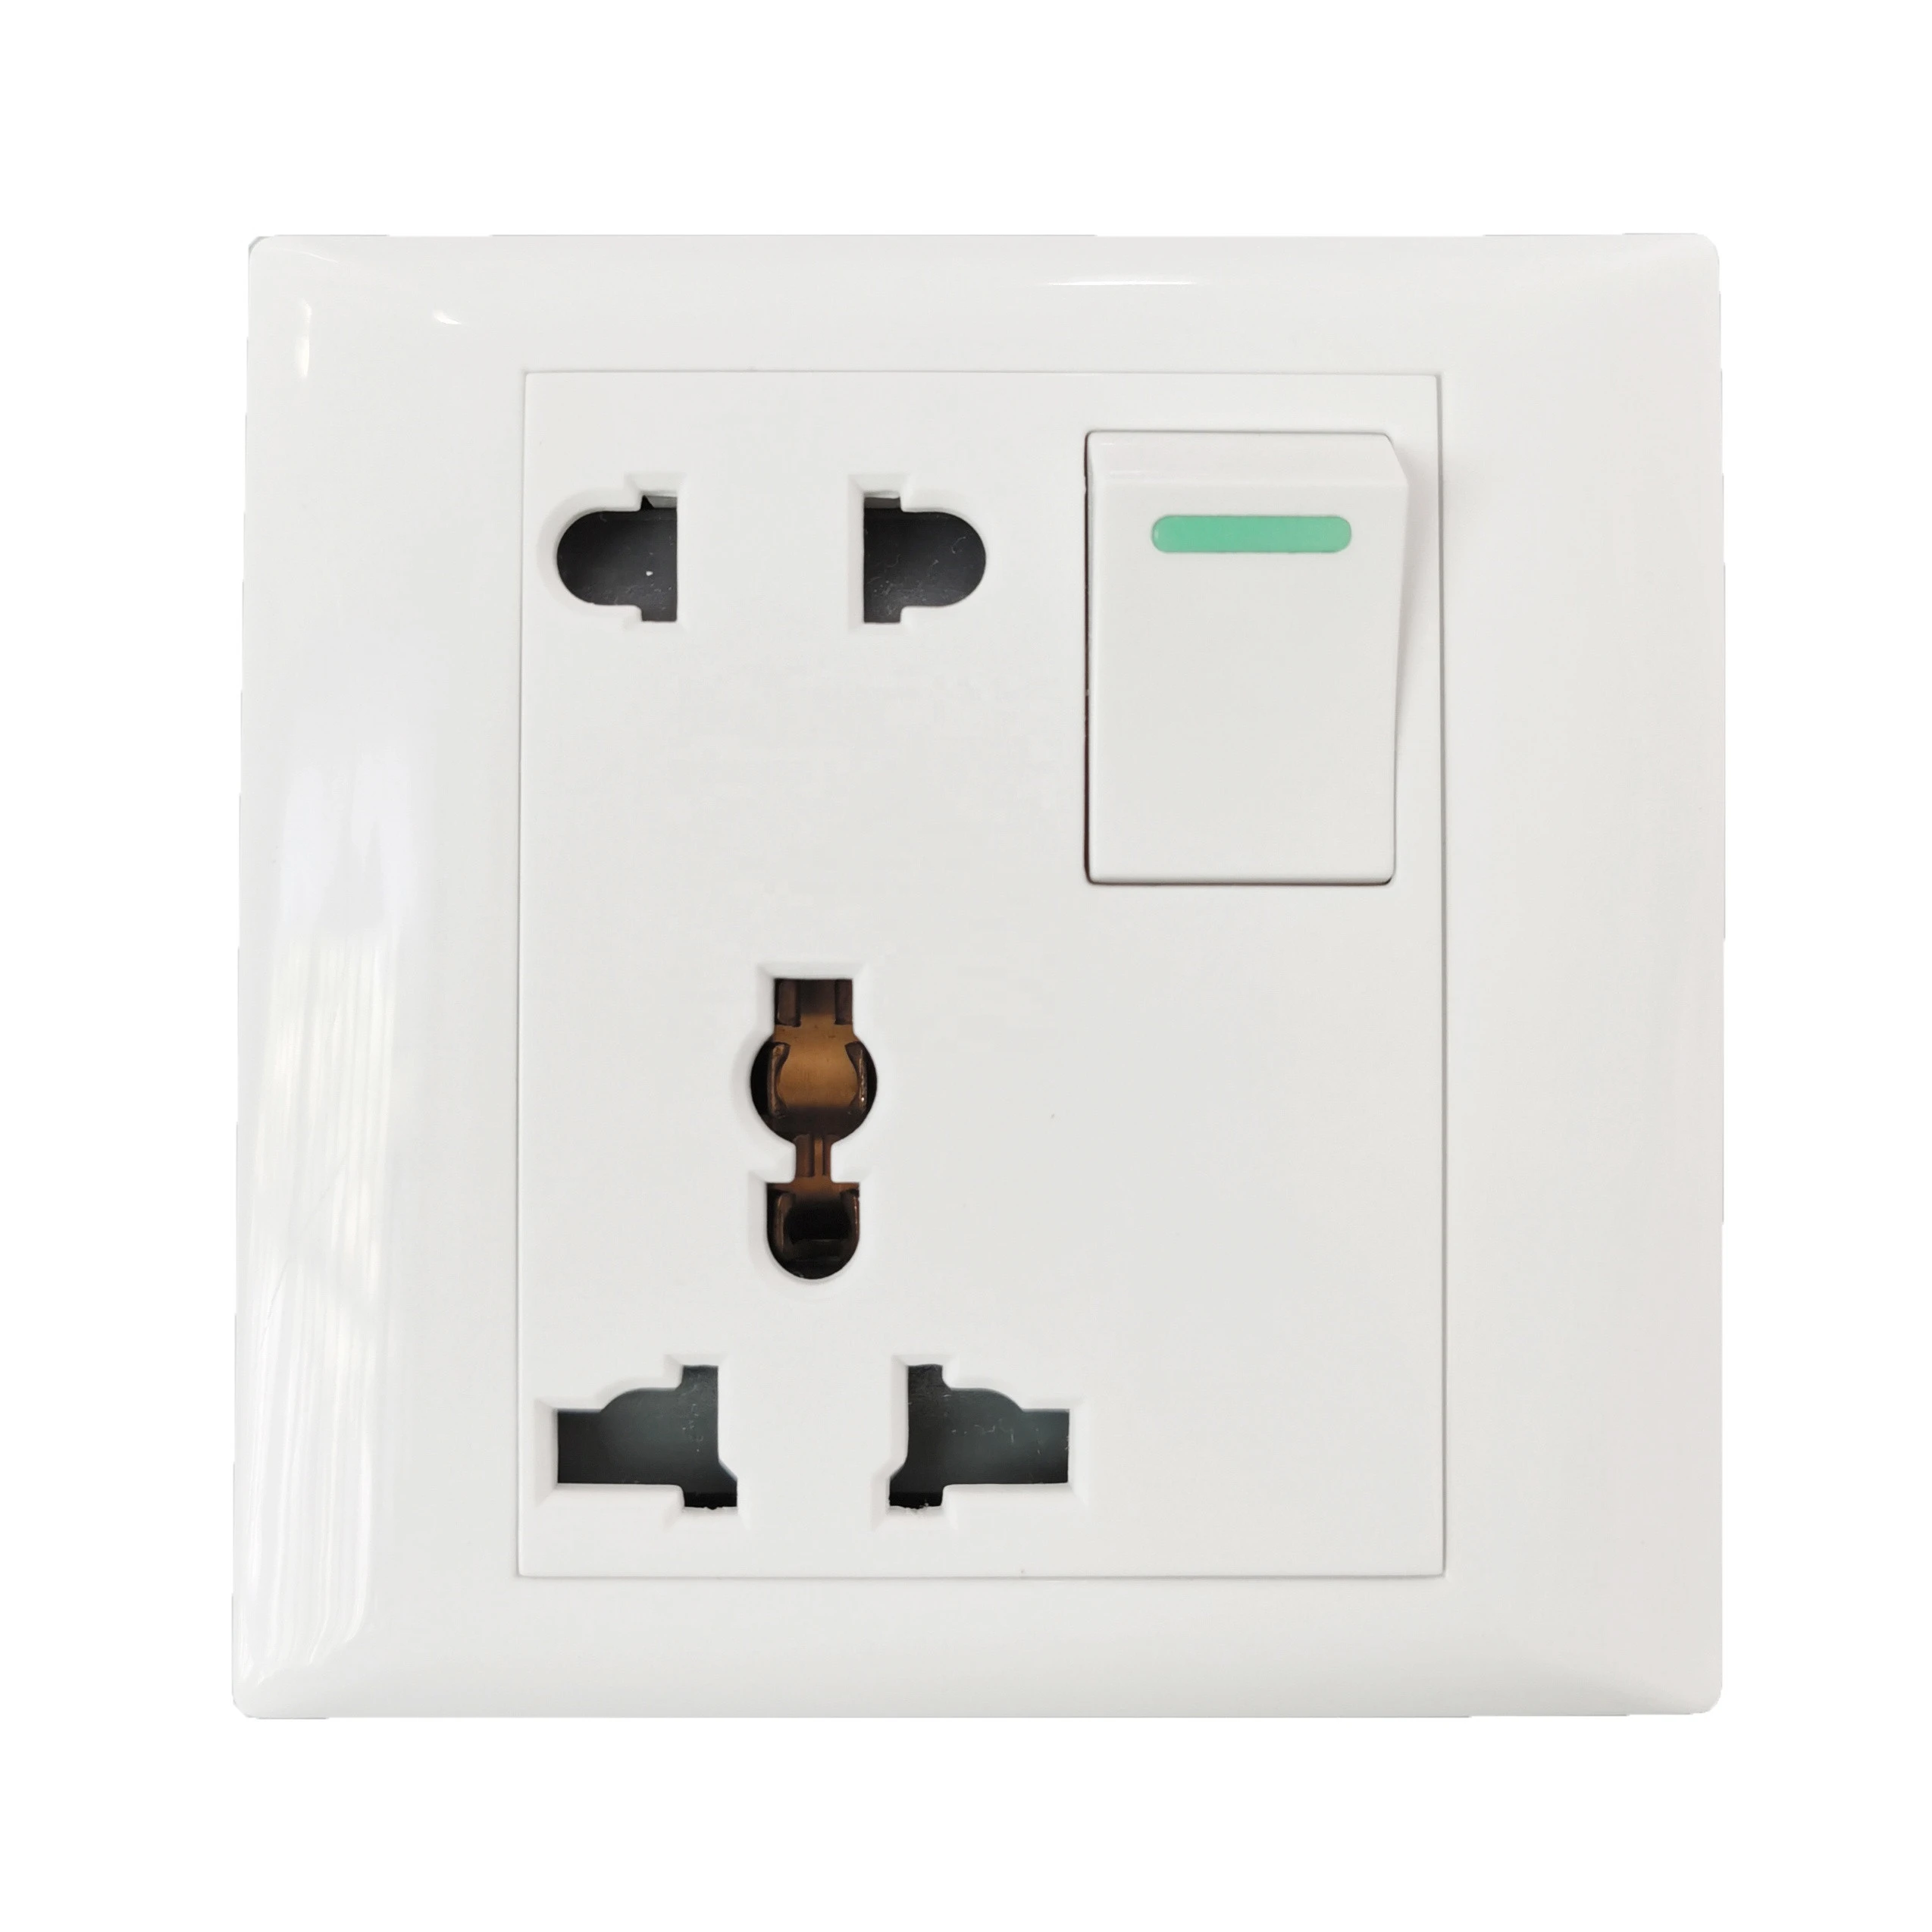 New design Cambodia hot sale fan dimmer electrical switch socket